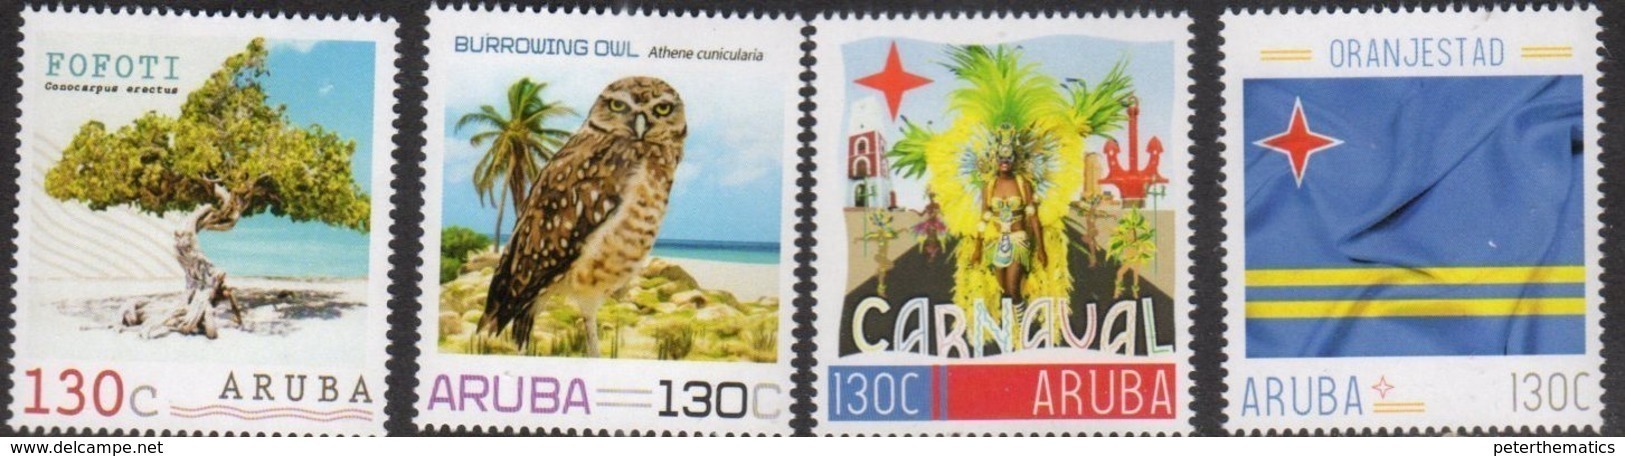 ARUBA, 2018, MNH, PERSONALIZED STAMPS, BIRDS, OWLS, CARNIVALS, FLAGS, TREES , 4v - Owls